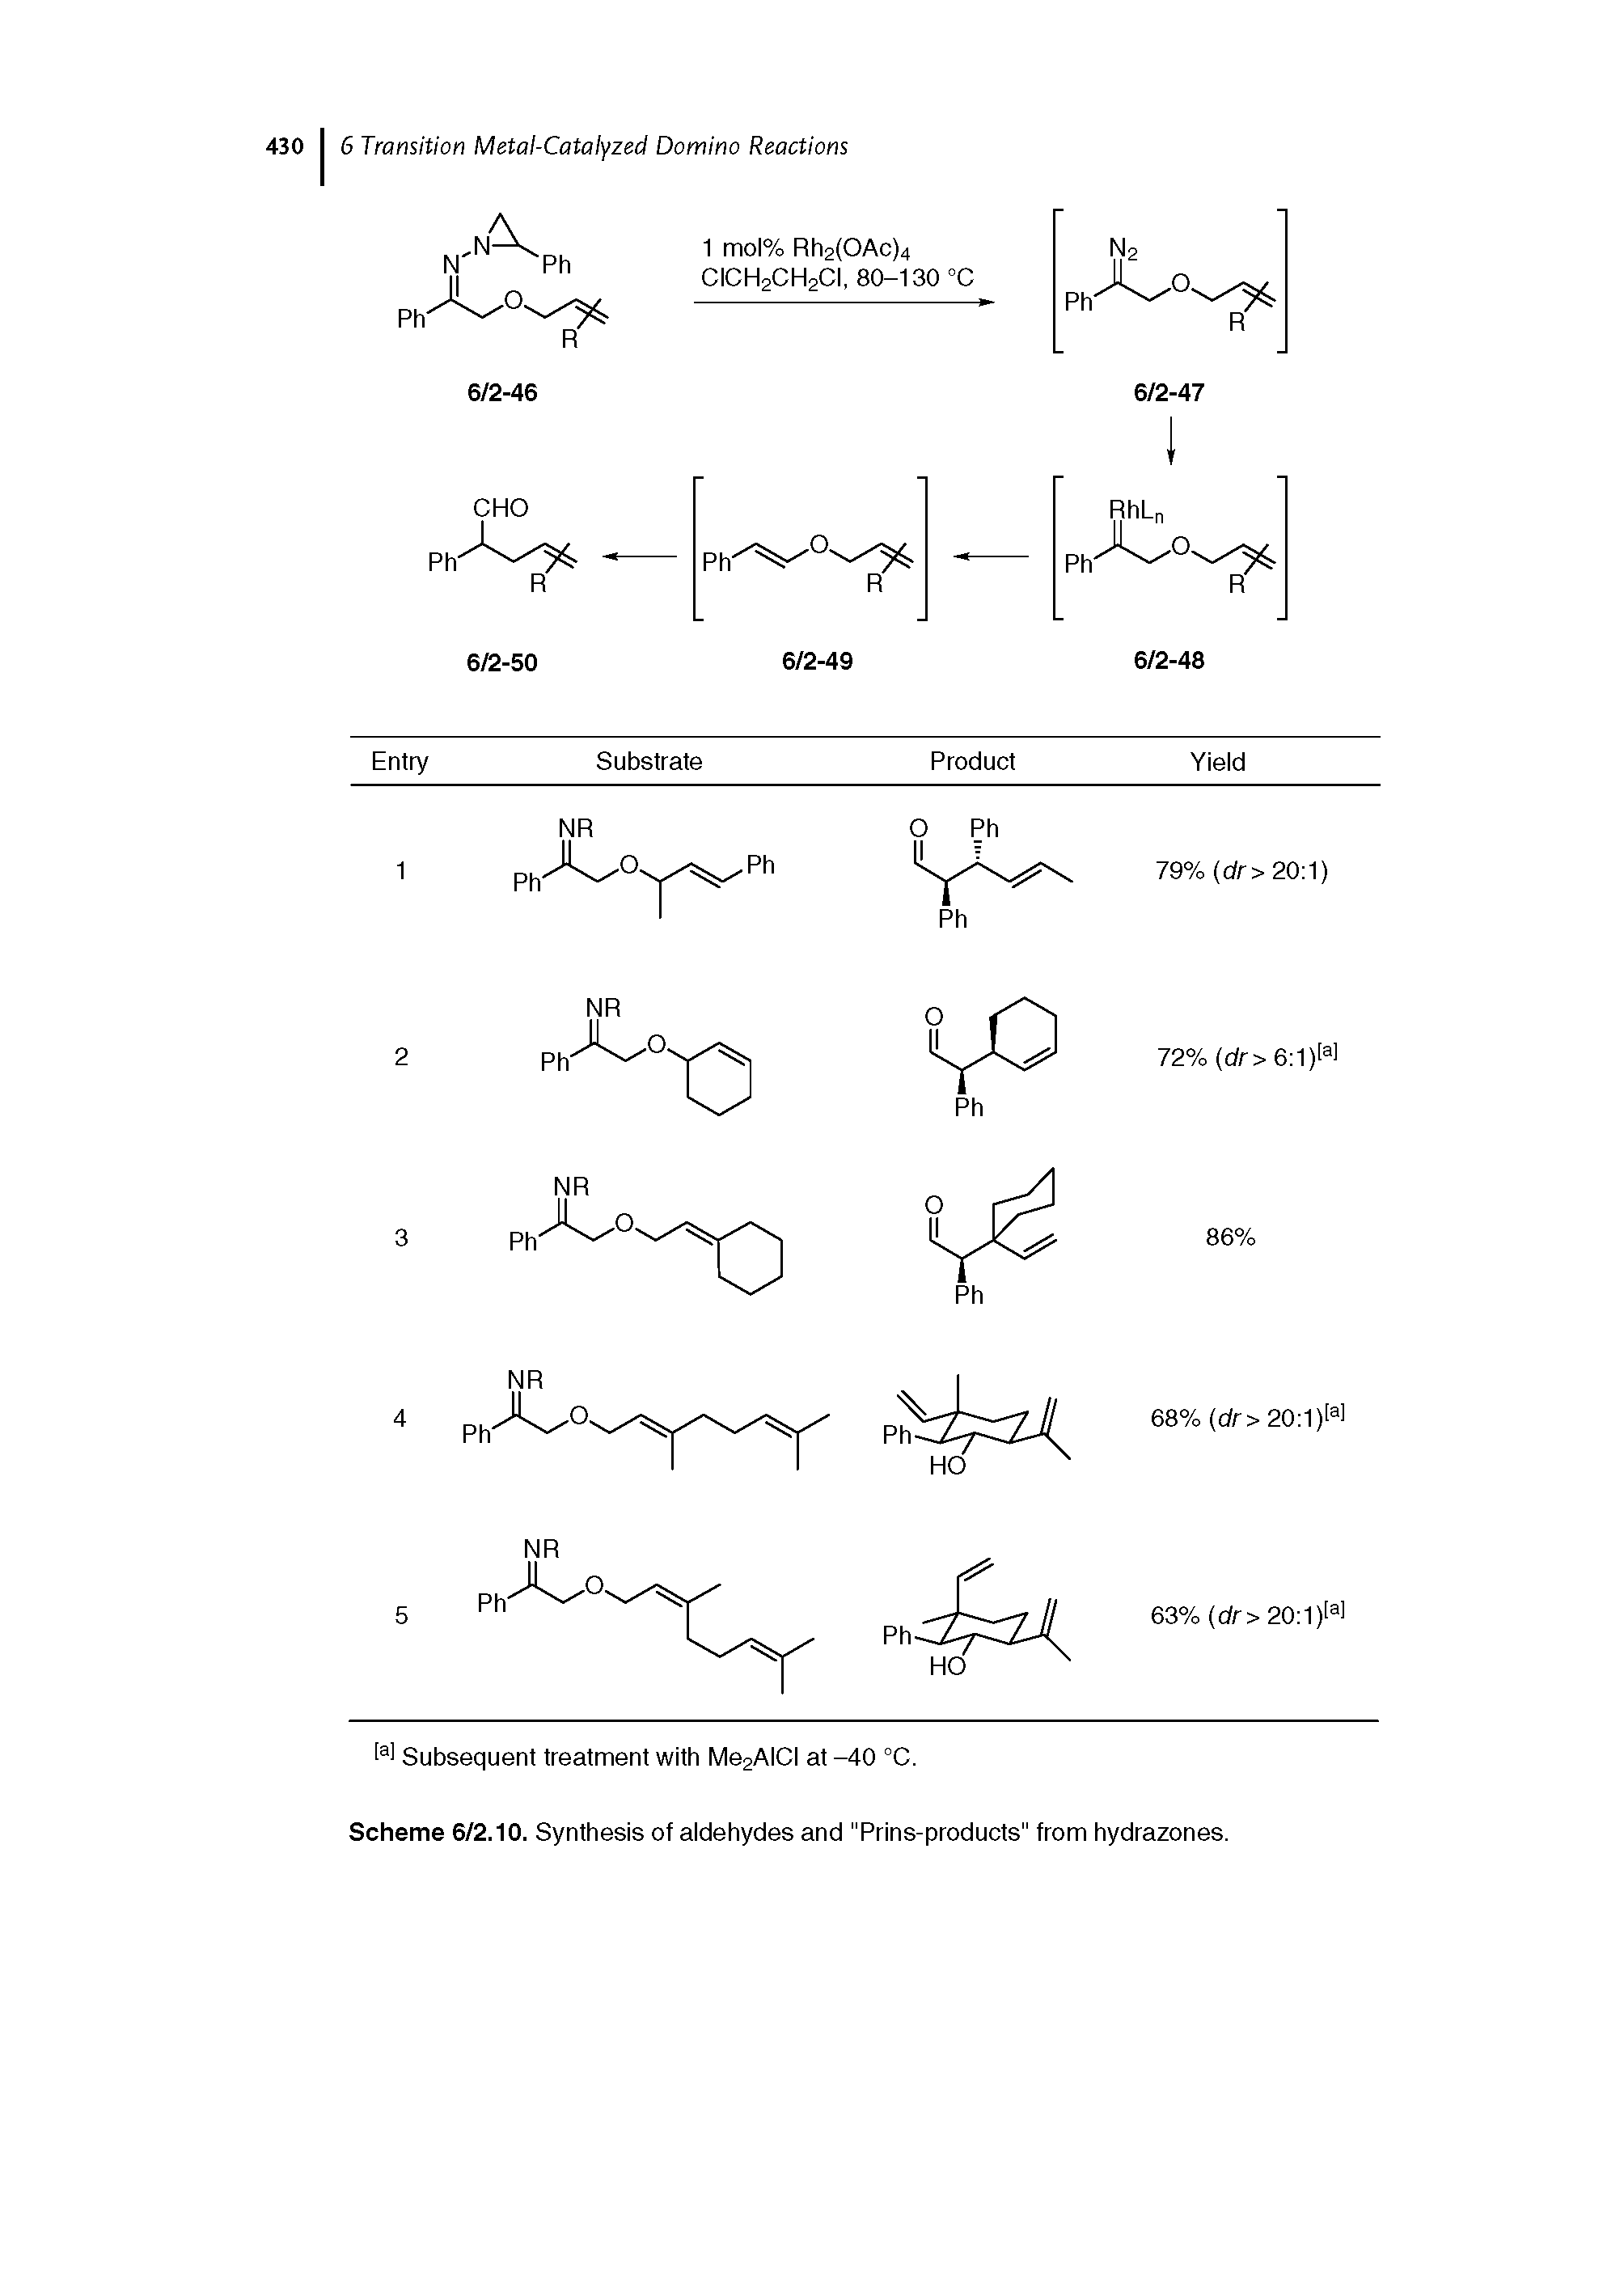 Scheme 6/2.10. Synthesis of aldehydes and "Prins-products" from hydrazones.